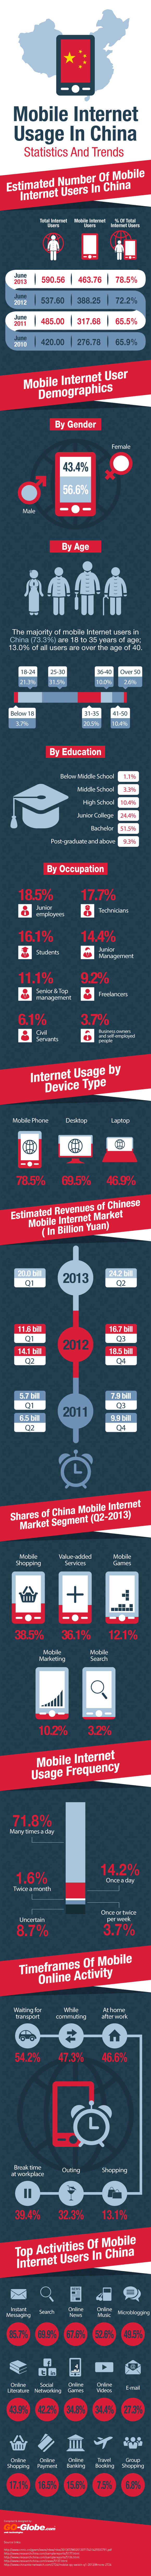 Mobile Internet Usage In China – Statistics And Trends